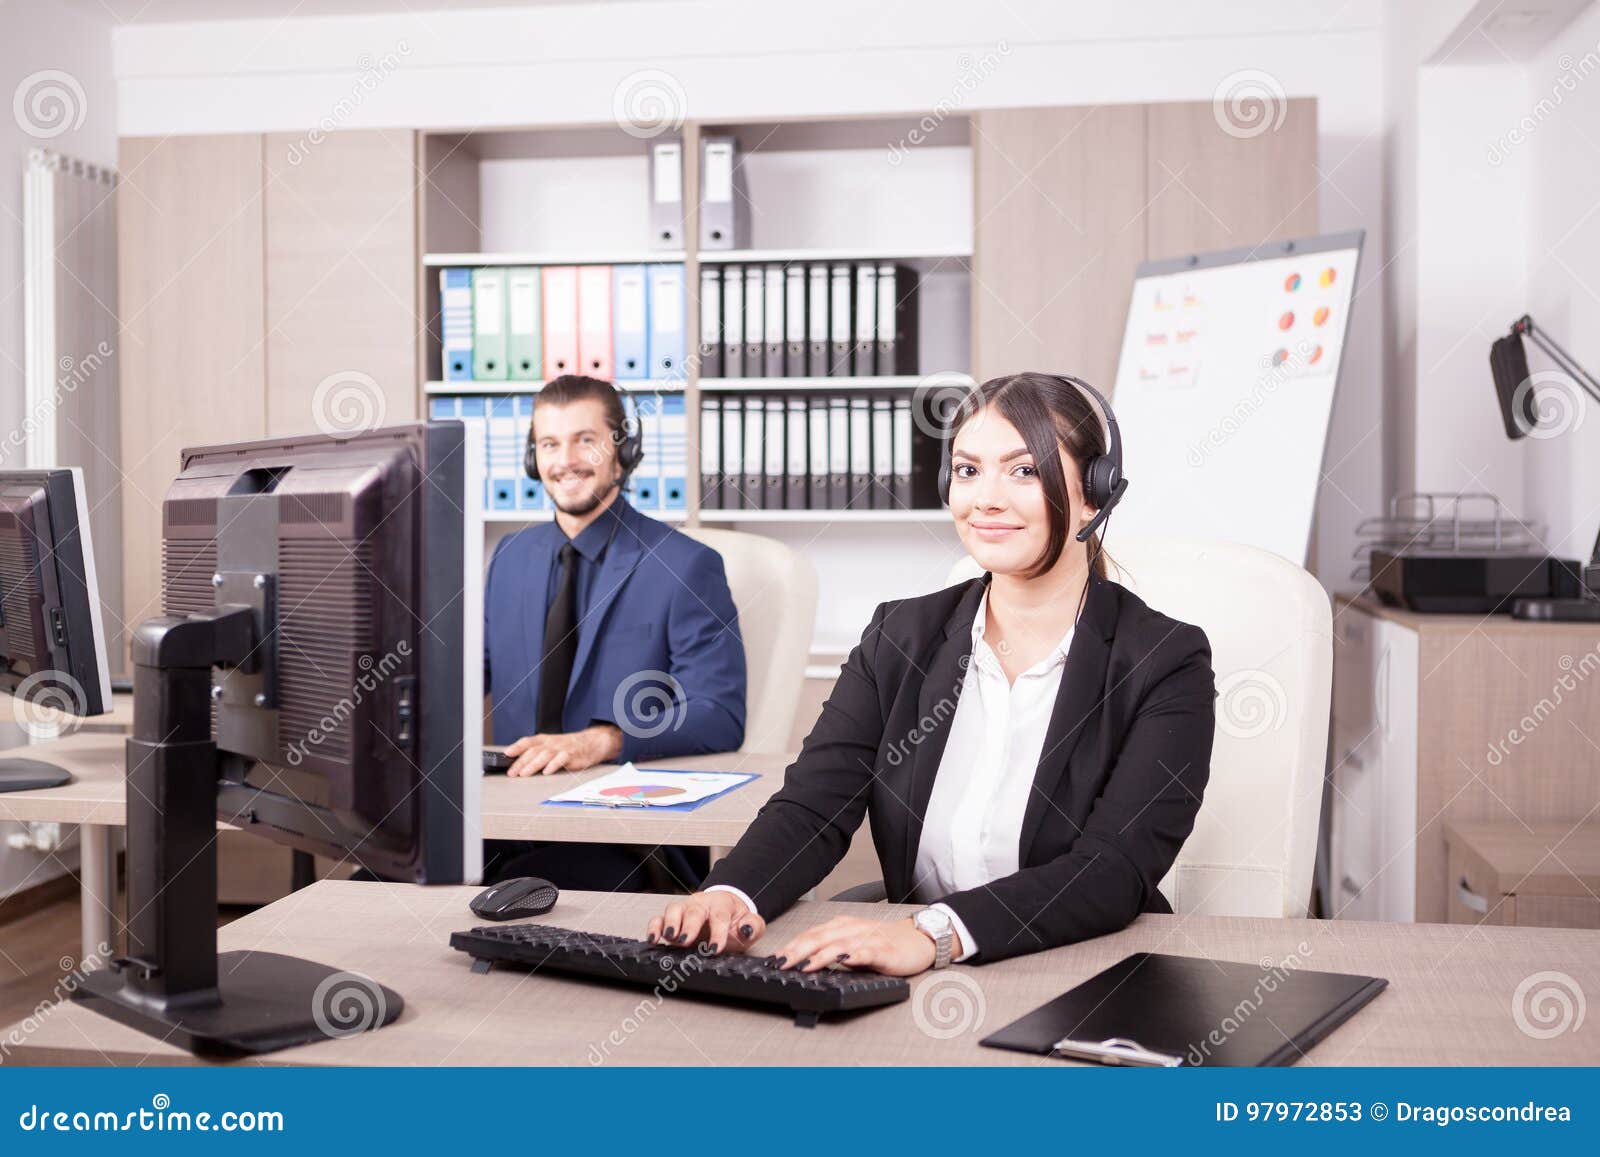 Customer Support Line Woman Worker Stock Image Image Of Operator